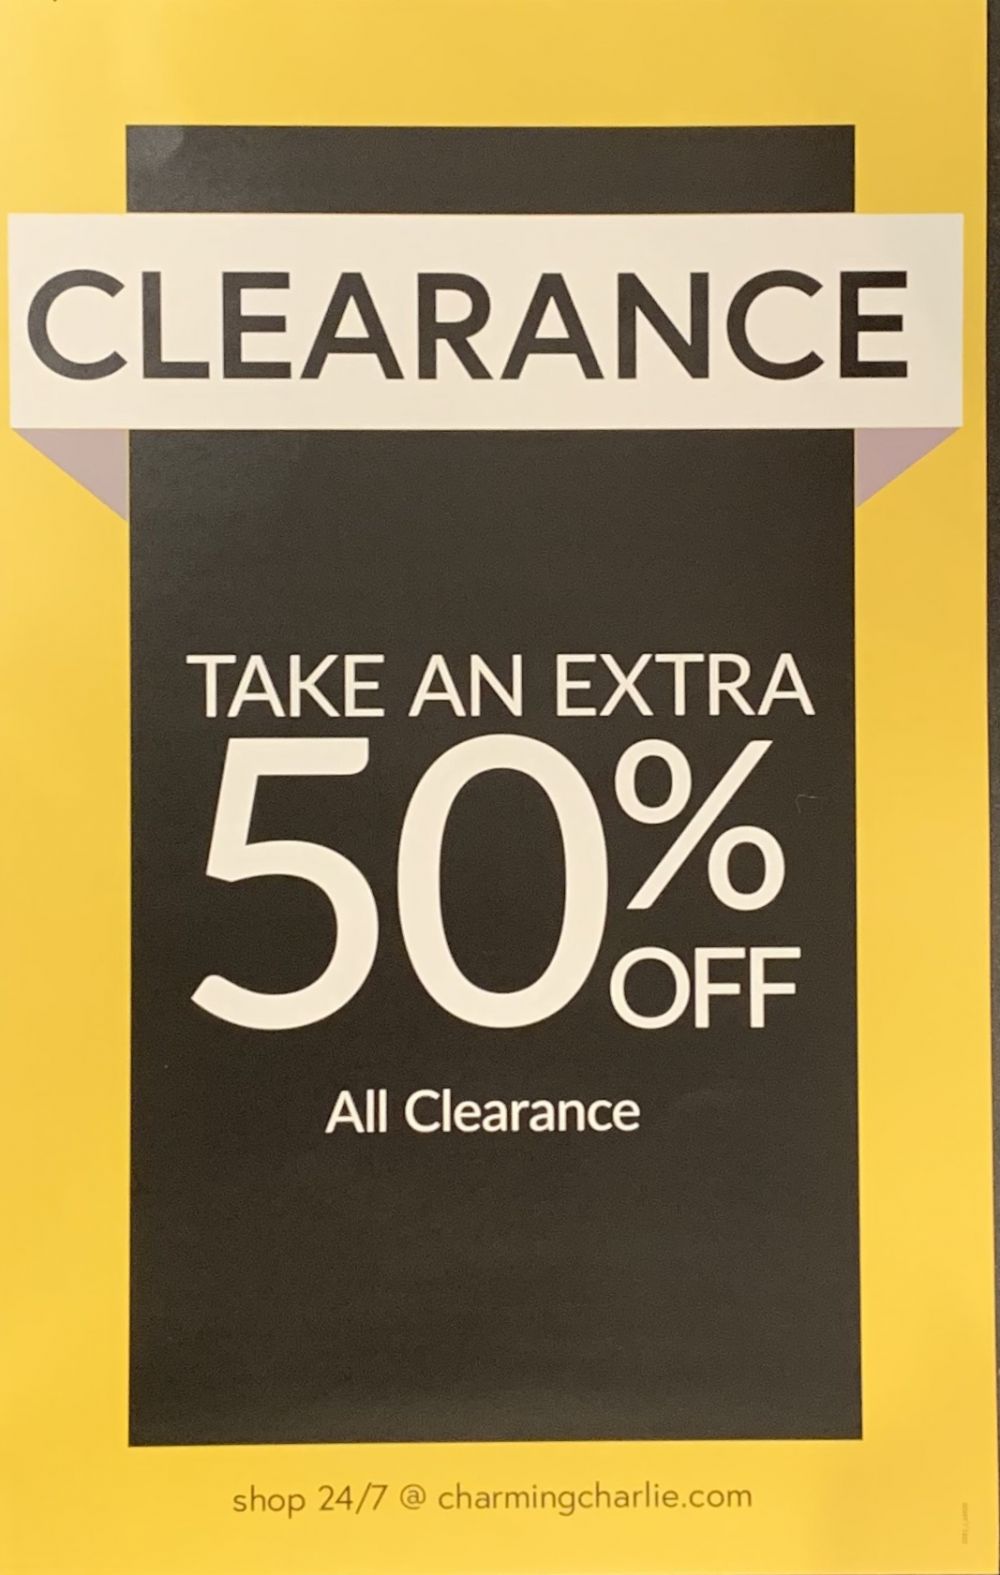 Additional 50% off All Clearance